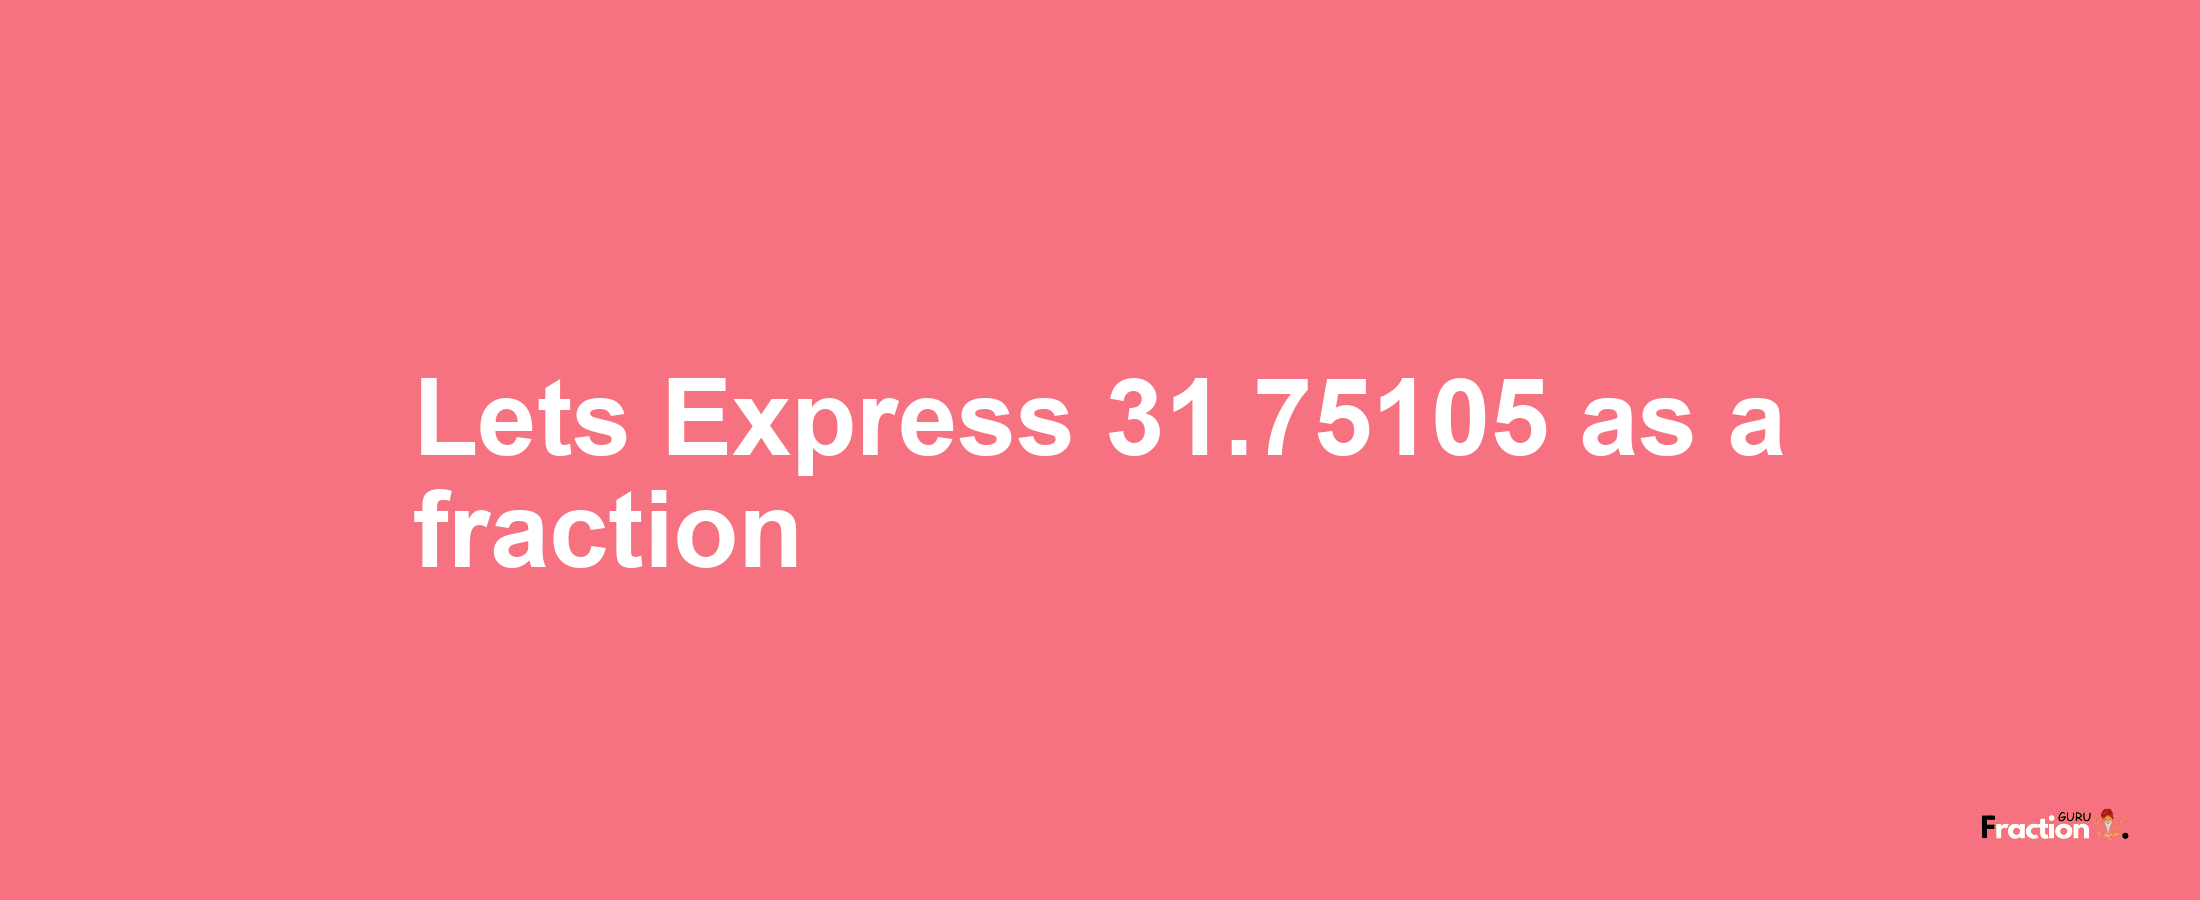 Lets Express 31.75105 as afraction